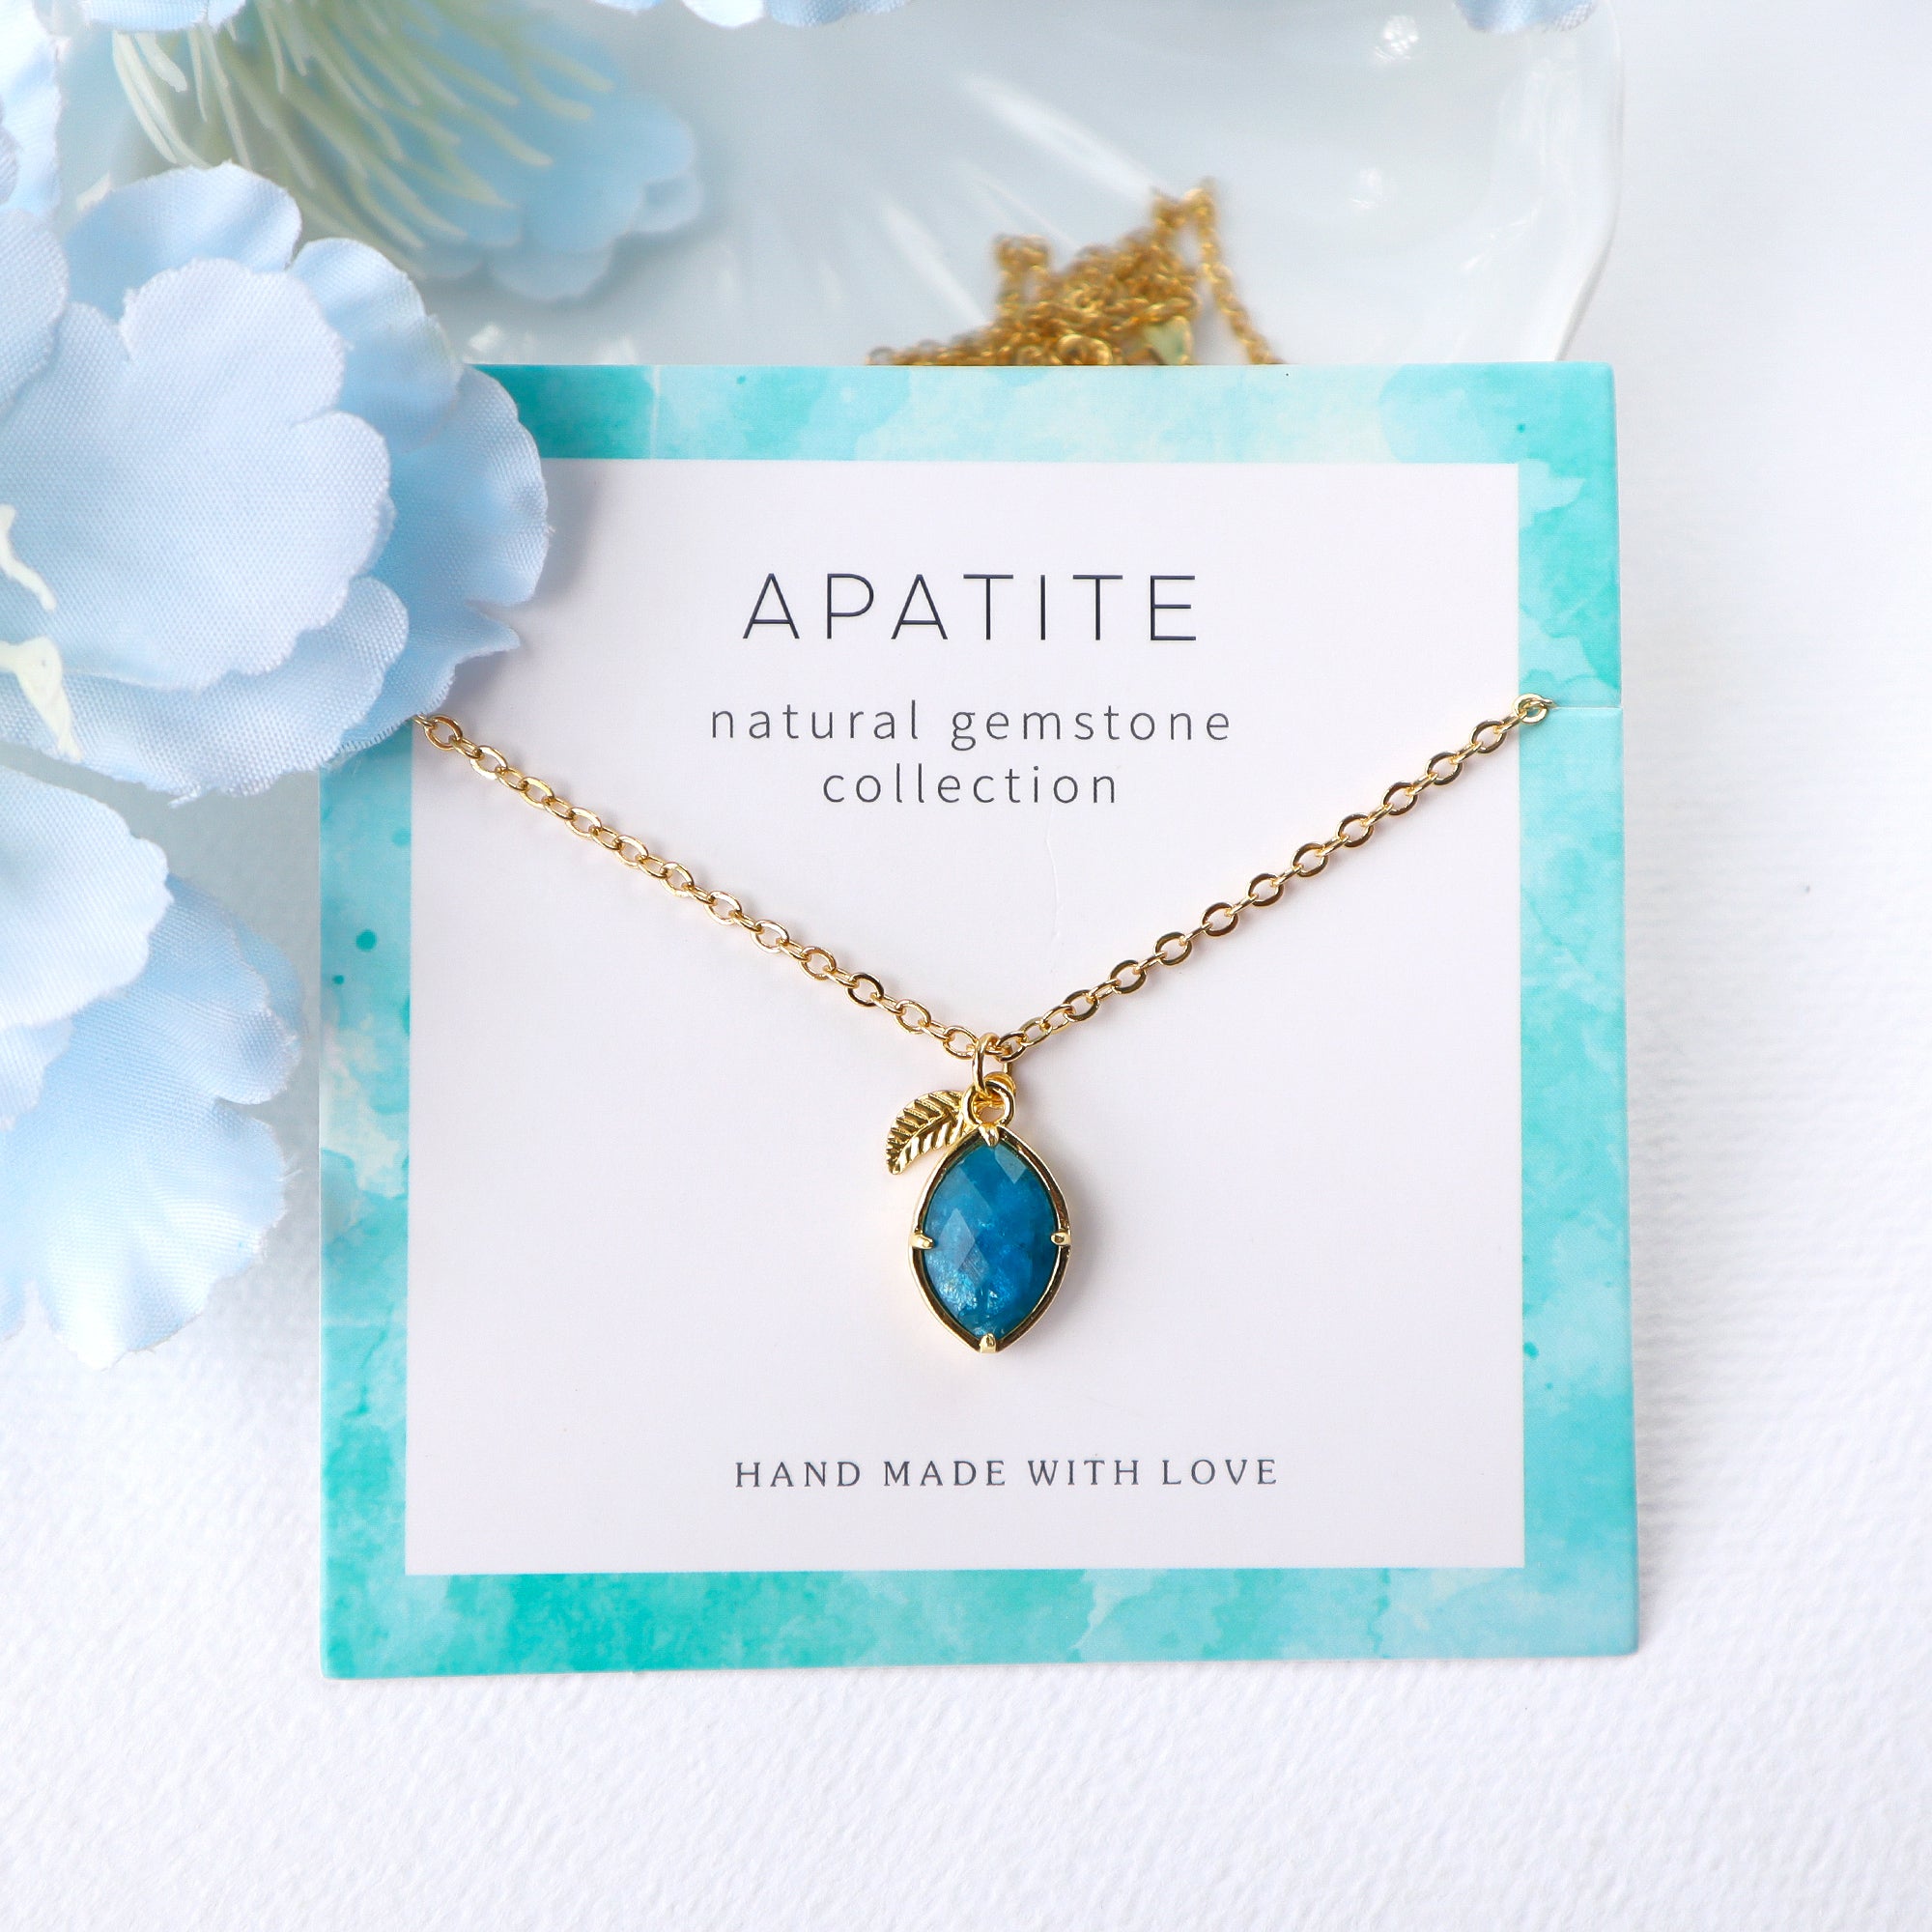 16" Gold Plated Leaf & Marquise Rainbow Gemstone Necklace, Birthstone, Faceted Amazonite Aquamarine Peridot Turquoise Necklace, Healing Crystal Jewelry BT015 Apatite Necklace 